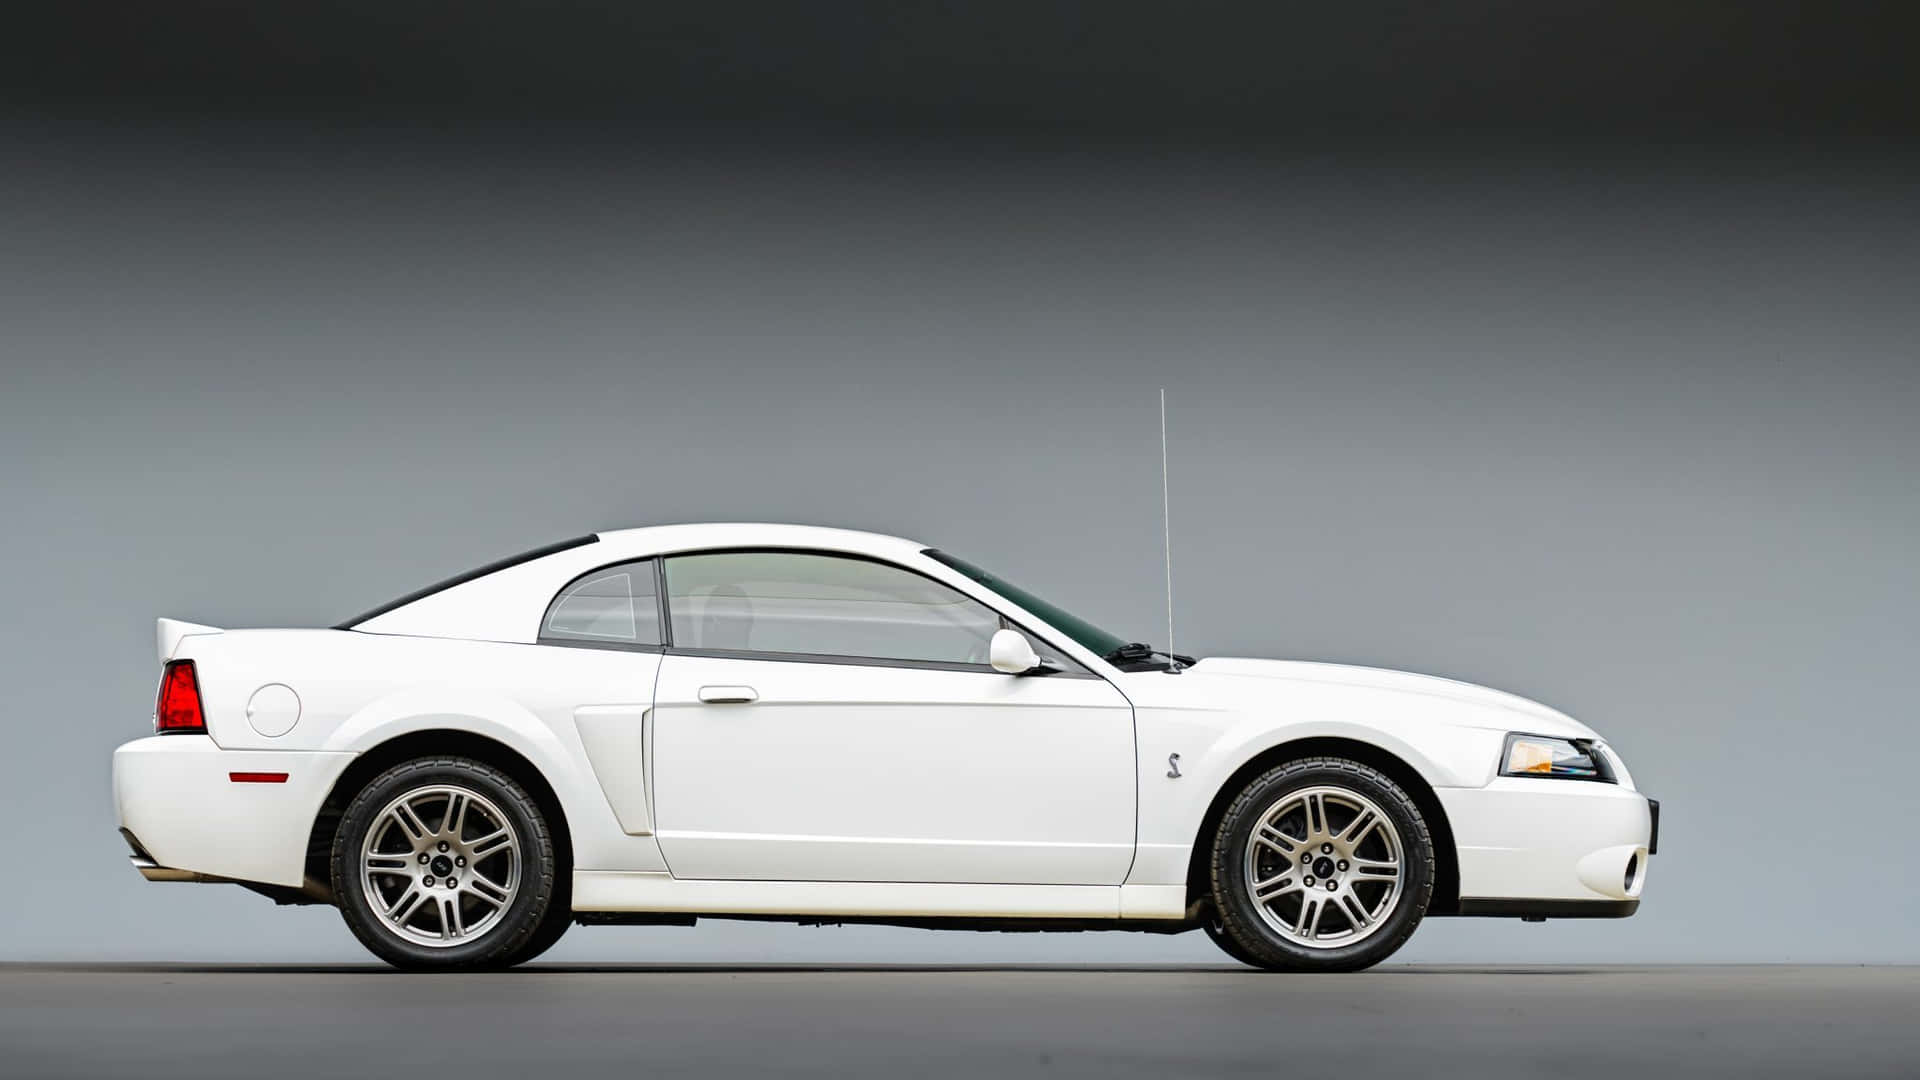 Majestic Ford Mustang Svt Cobra In High Definition Wallpaper